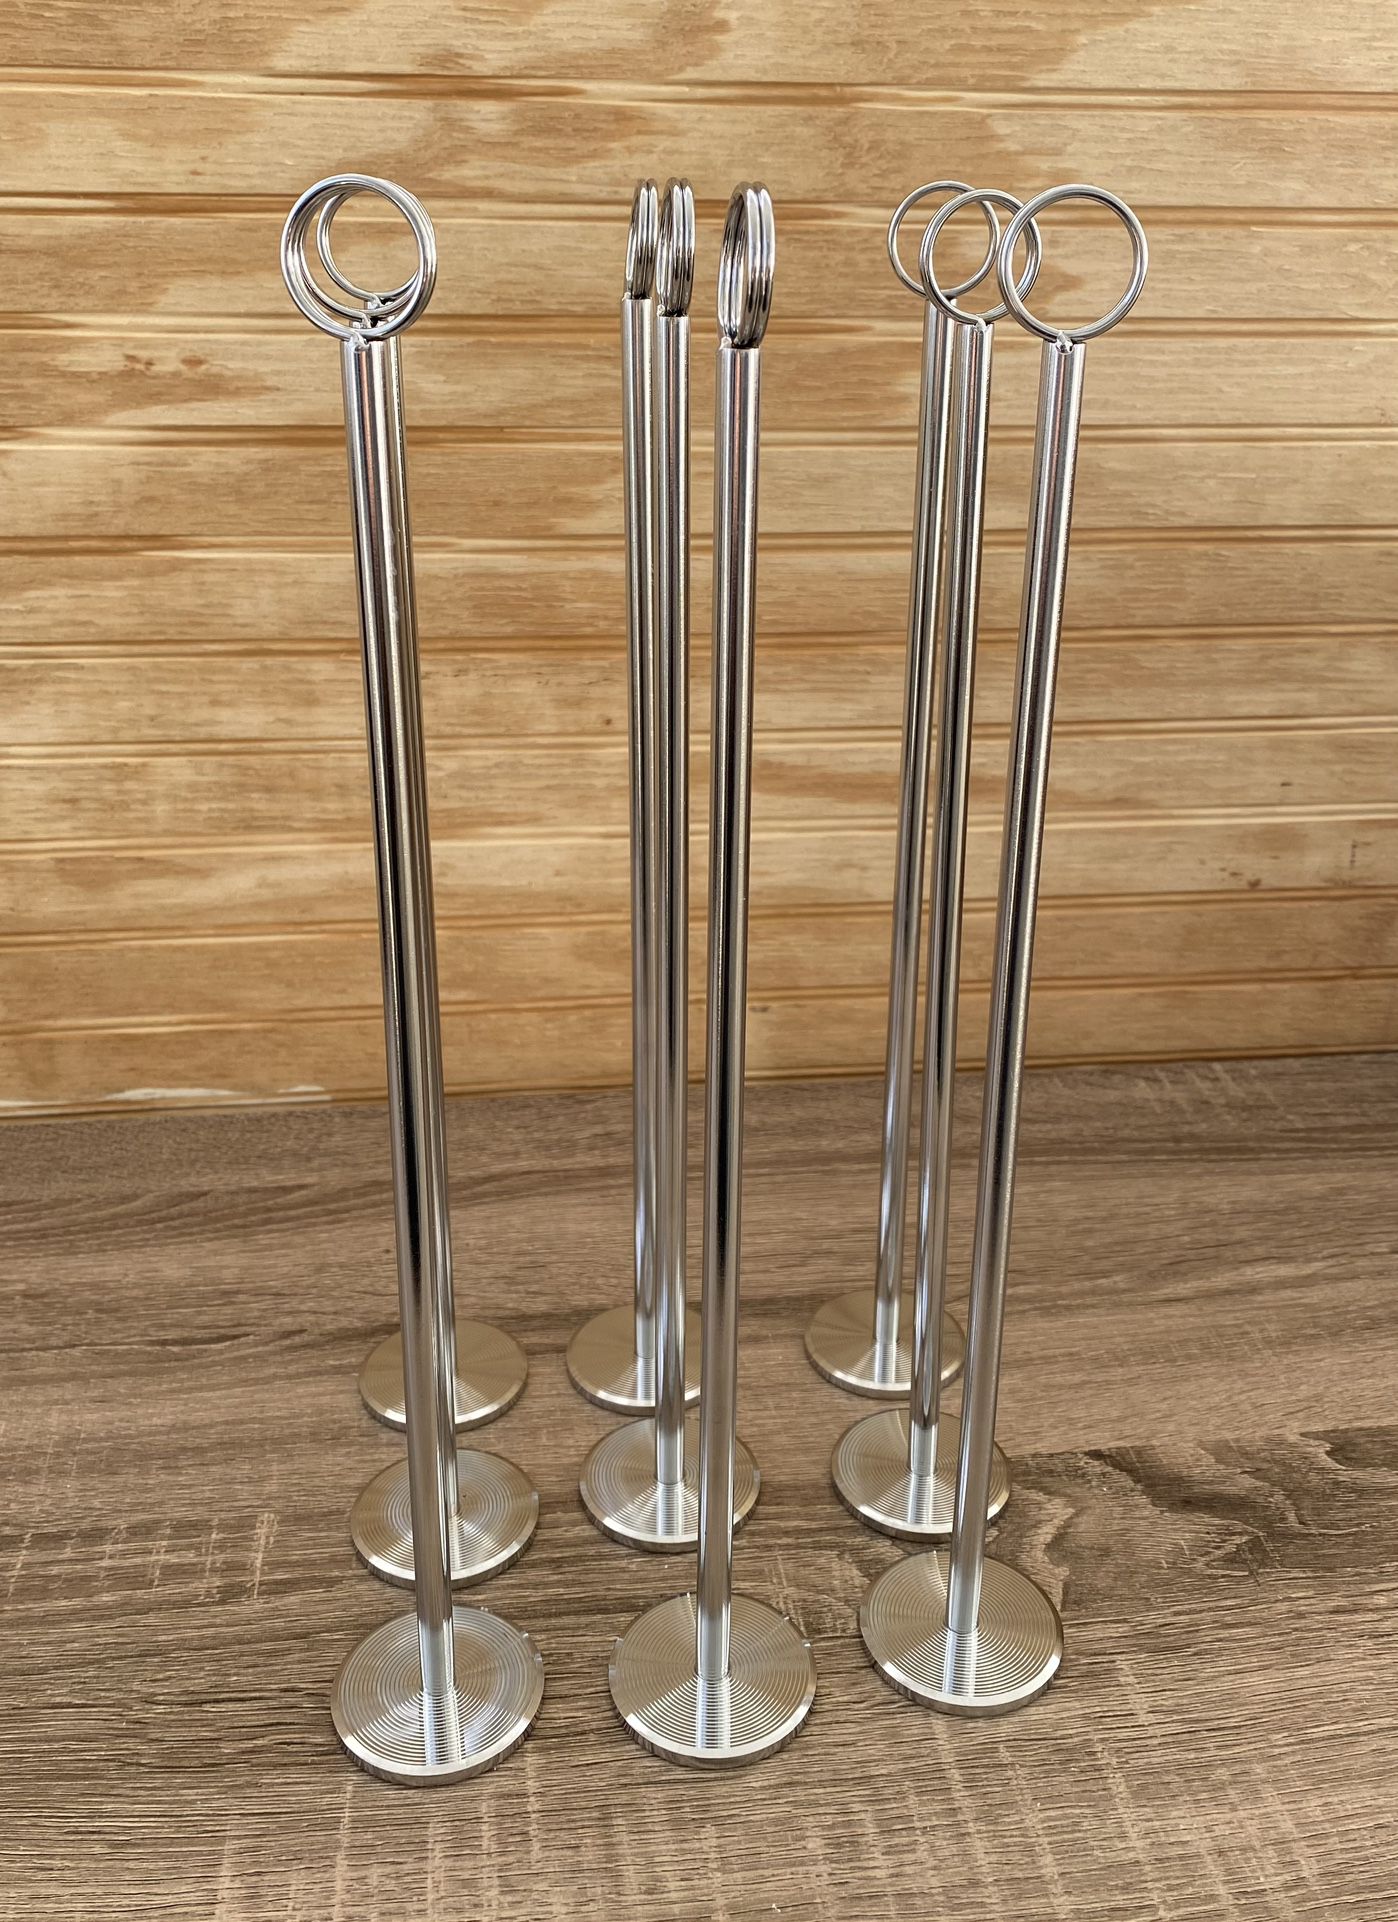 Chrome Table Number Holder/Number Stand/Place Card Holders - Set of 9 